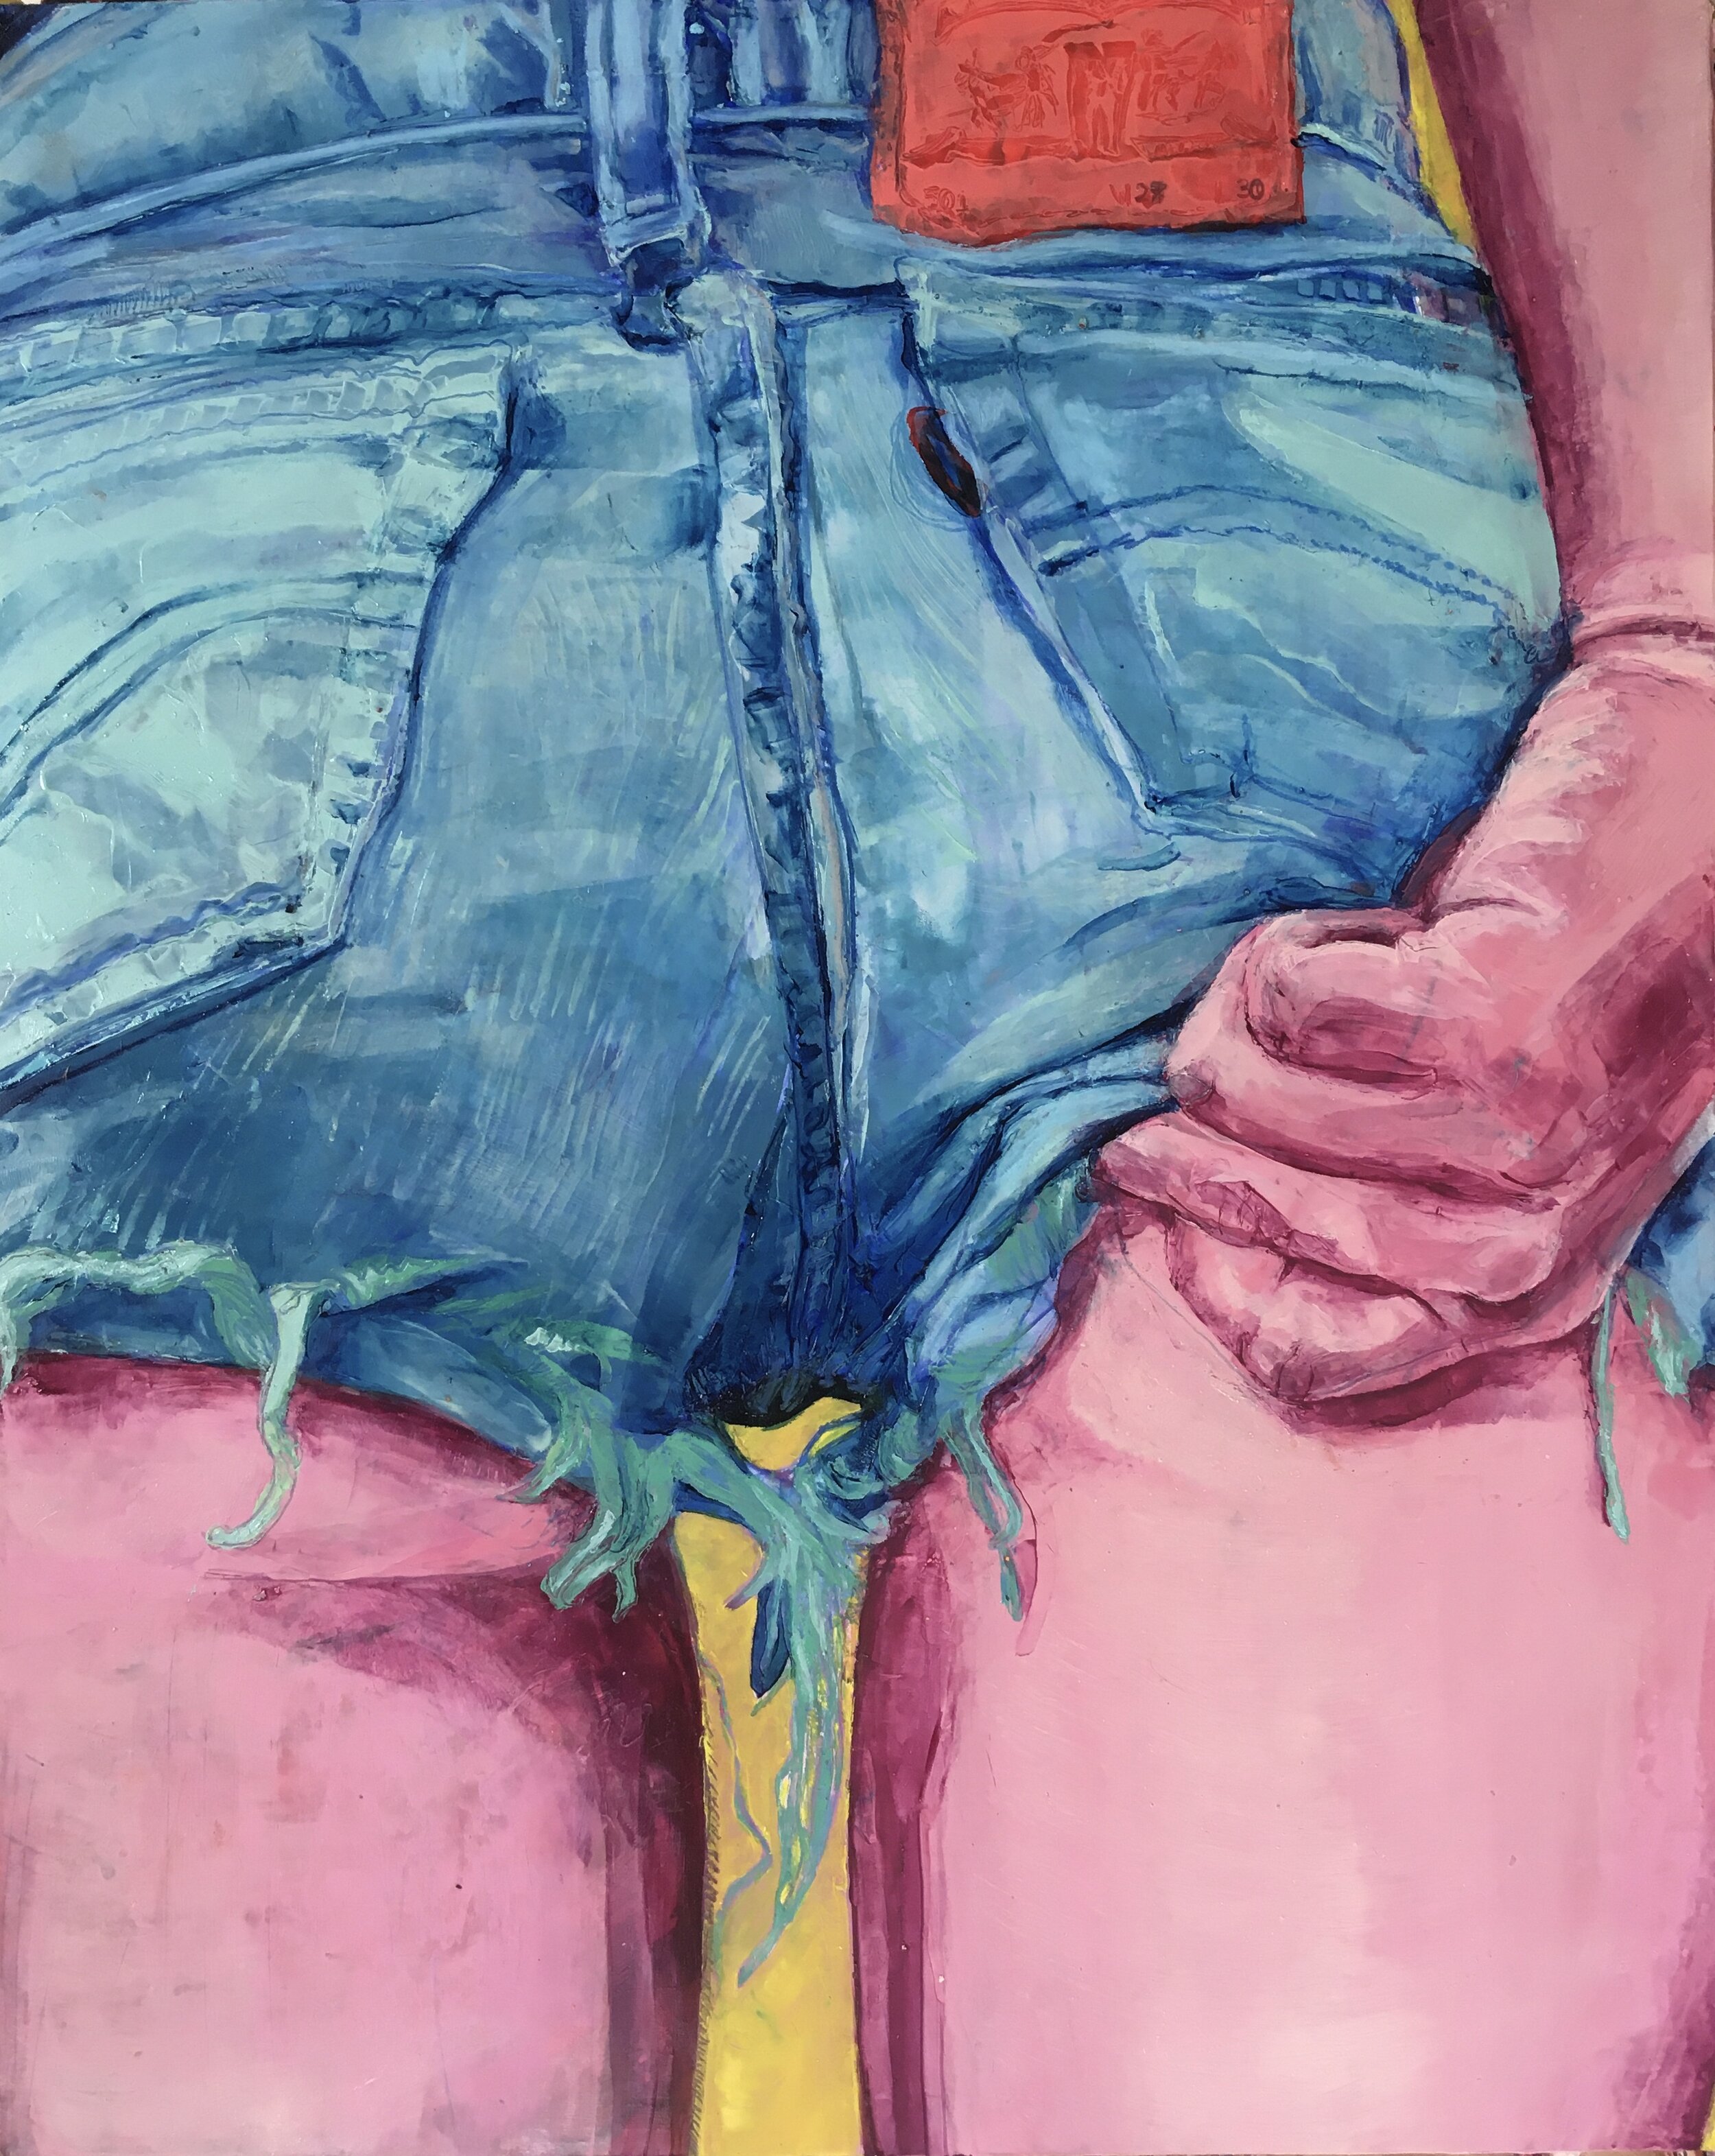 Wedgie (2020) Oil, Acrylic, Pastel, and Colored Pencil on Panel, 16"x20"